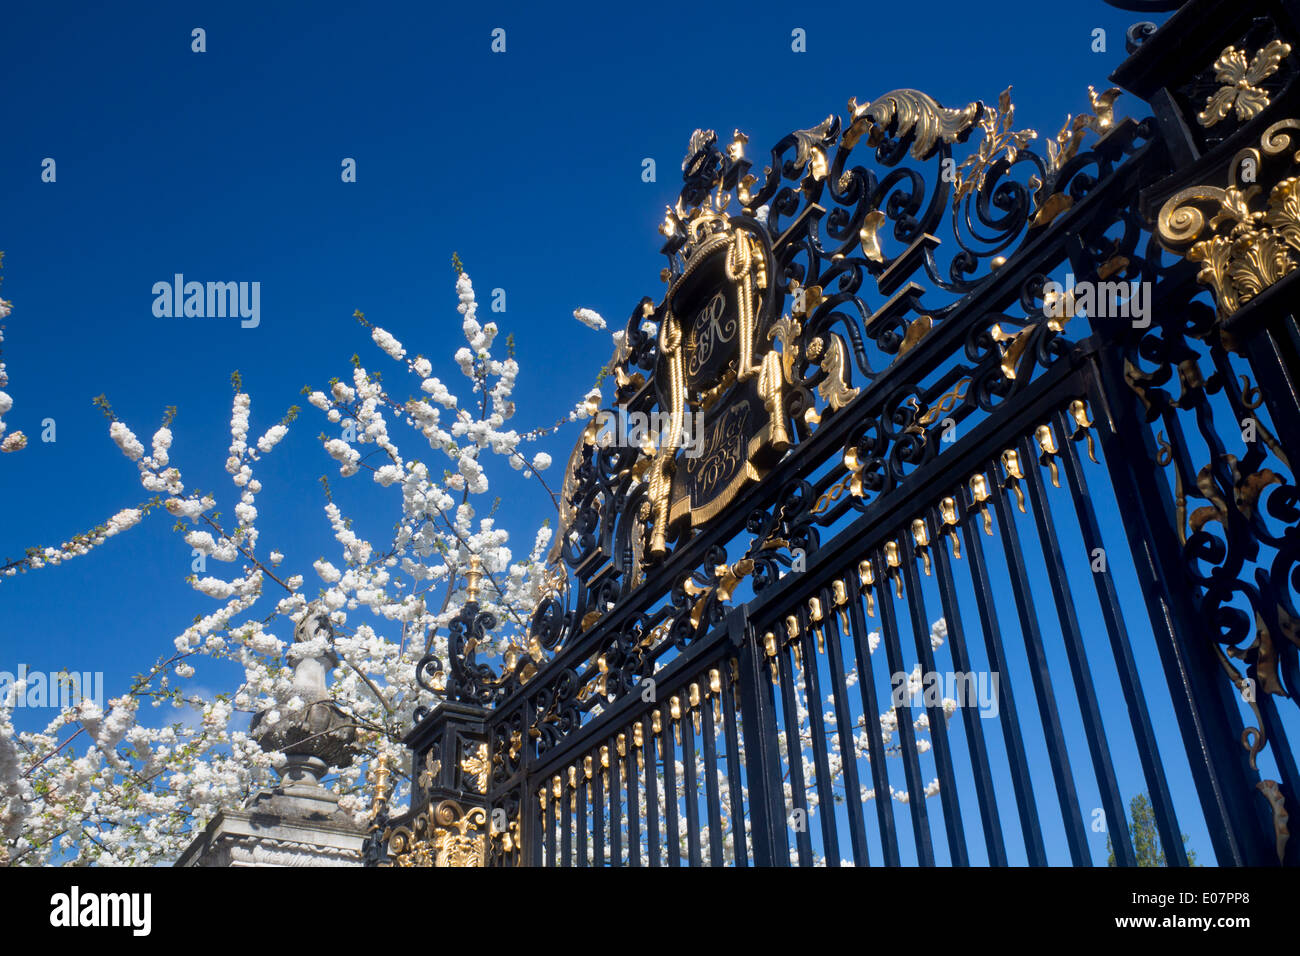 Jubilee Gates in spring with white blossom on trees The Regent's Park London England UK Stock Photo